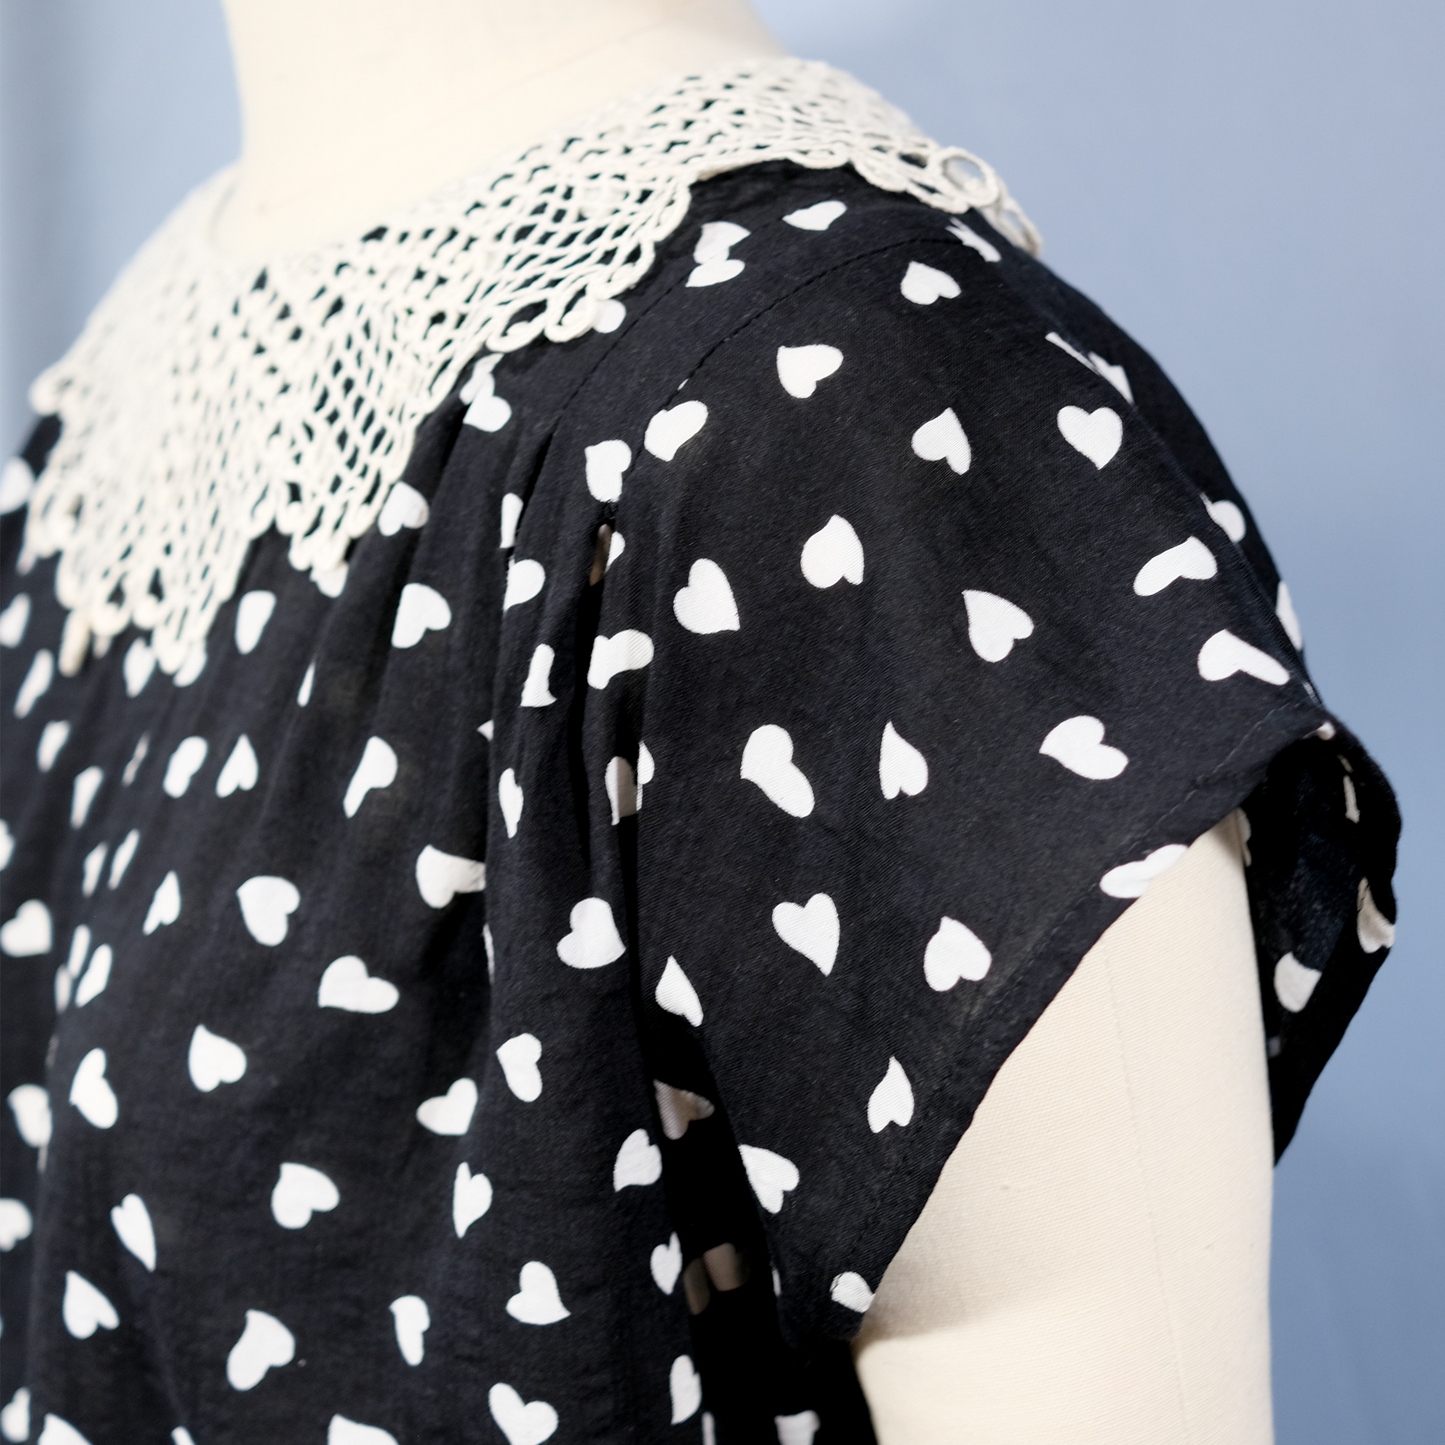 Ruth - Heart Print Cotton Blouse with Up-cycled Collar - Size Medium/Large